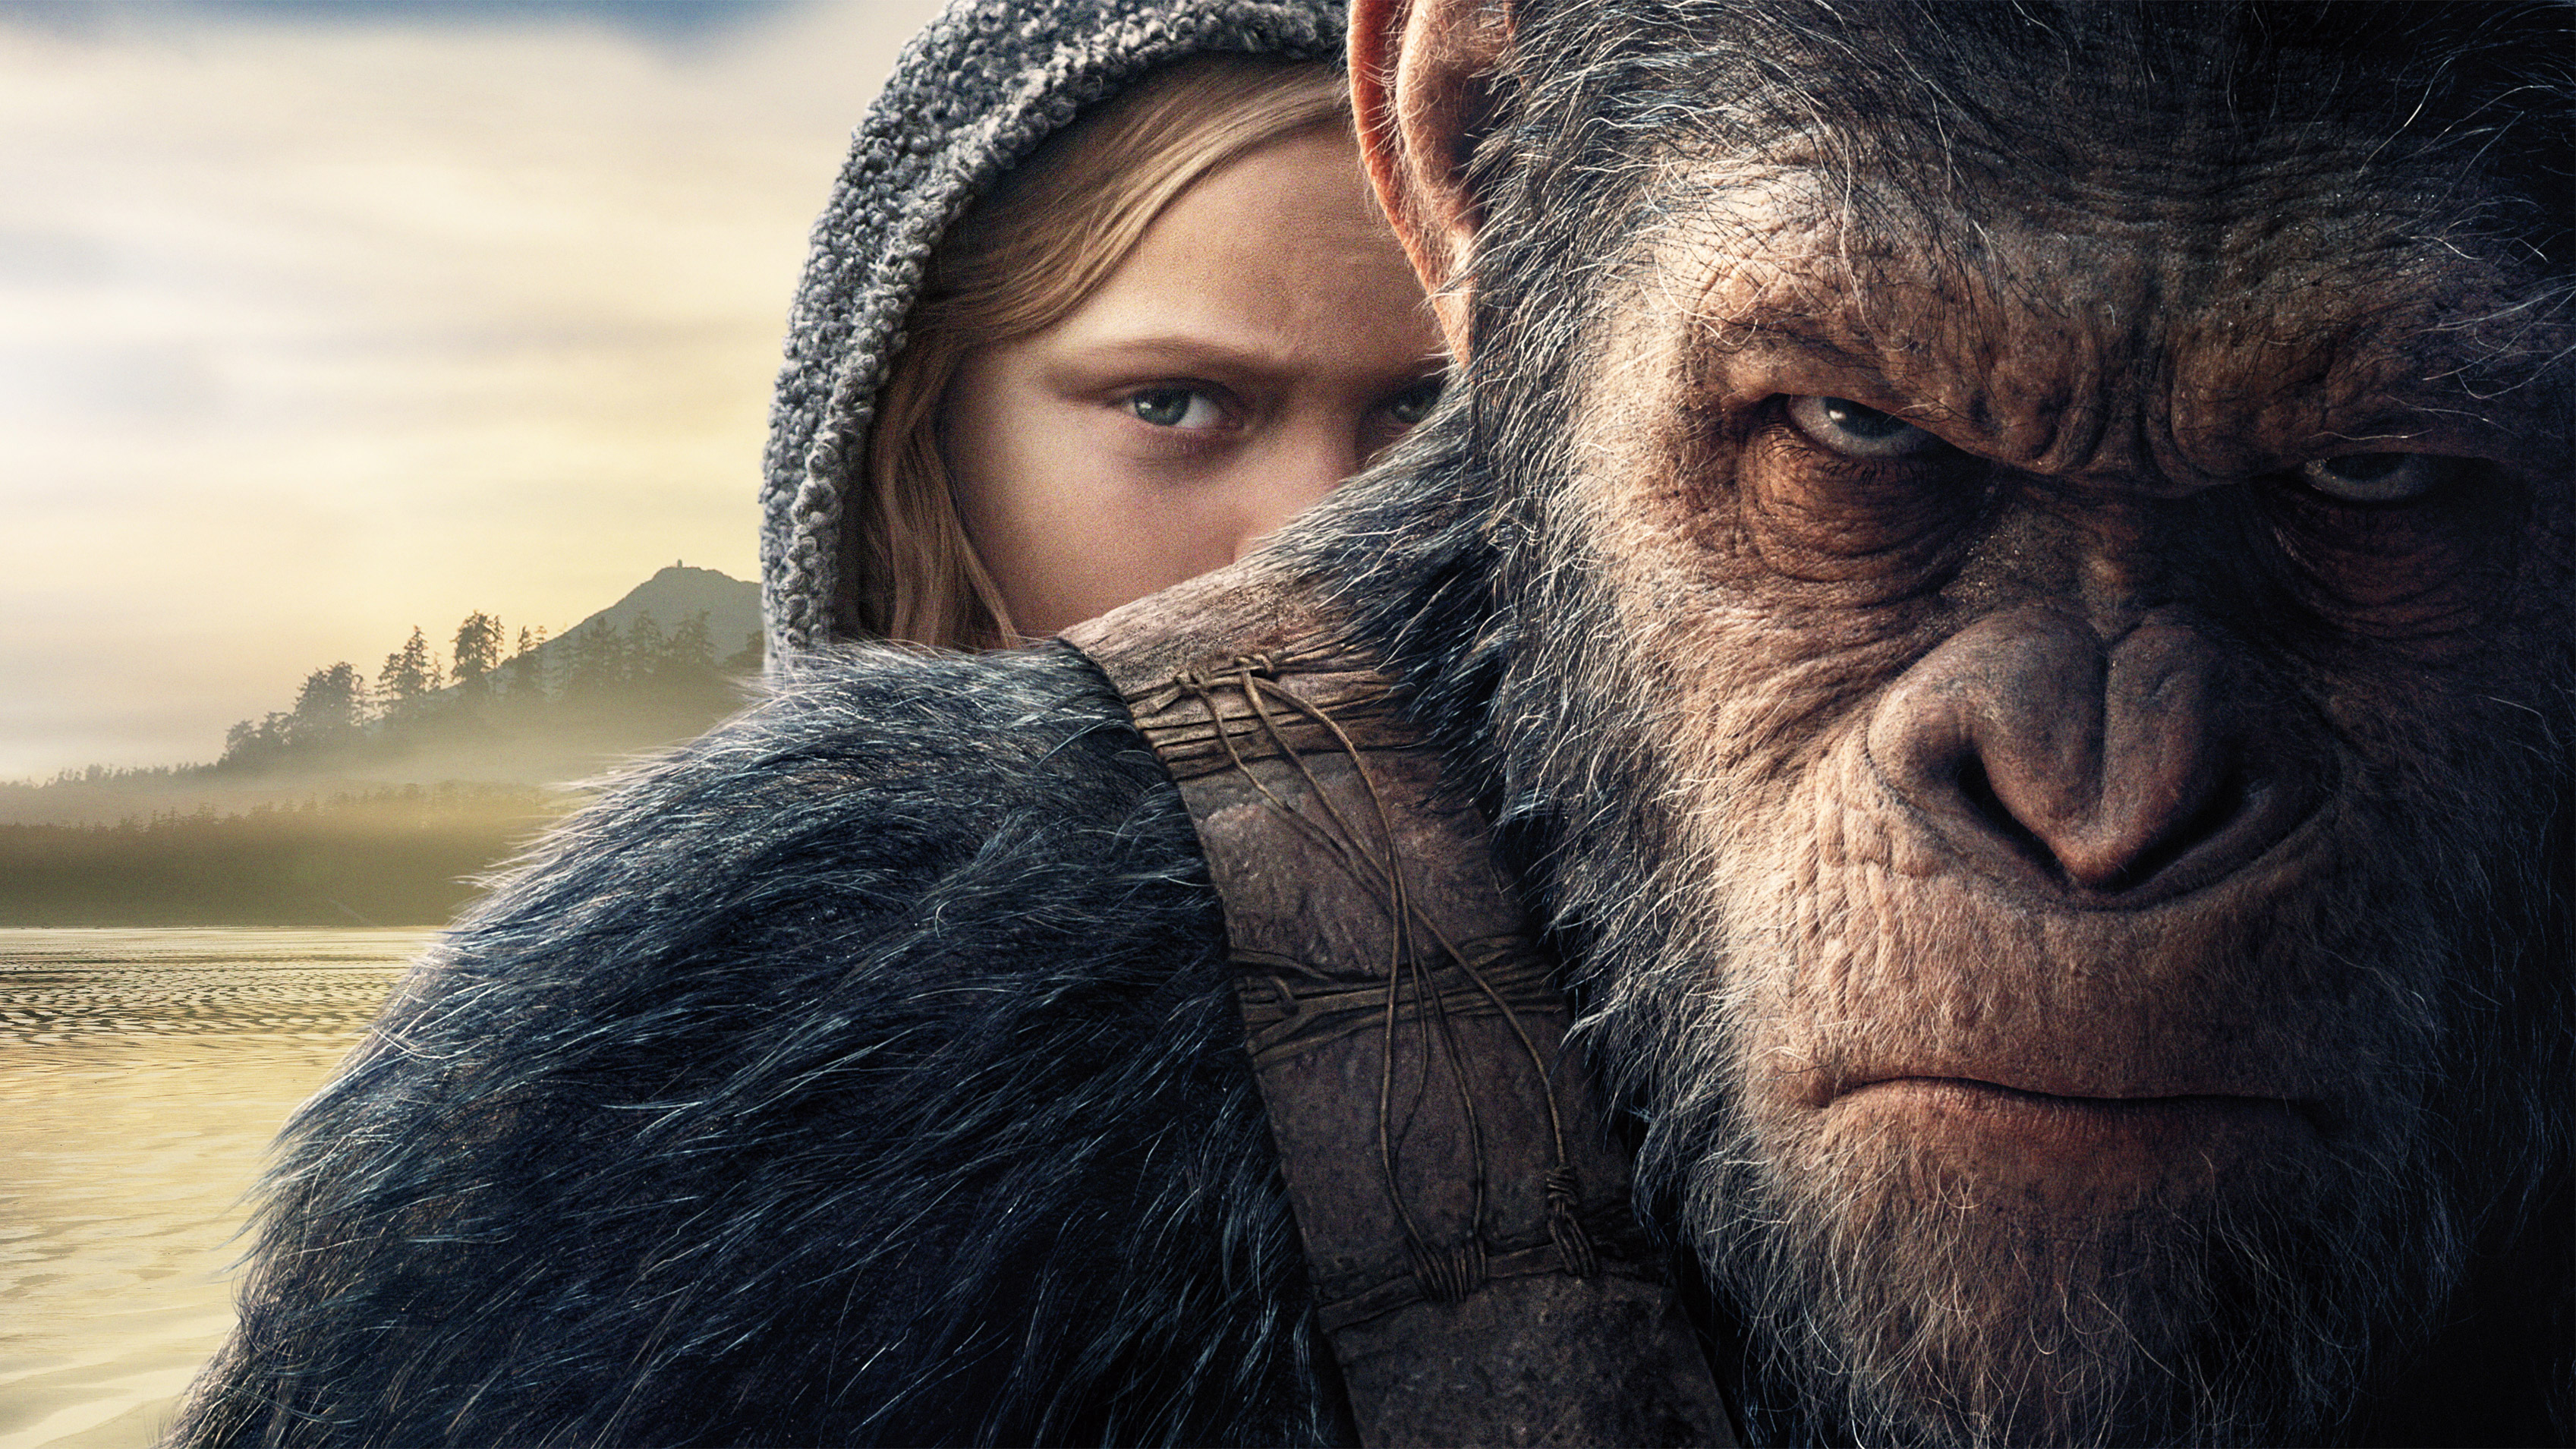 War Of The Planet Of The Apes Free Online 2017 War For The Planet Of The Apes, HD Movies, 4k Wallpapers, Images